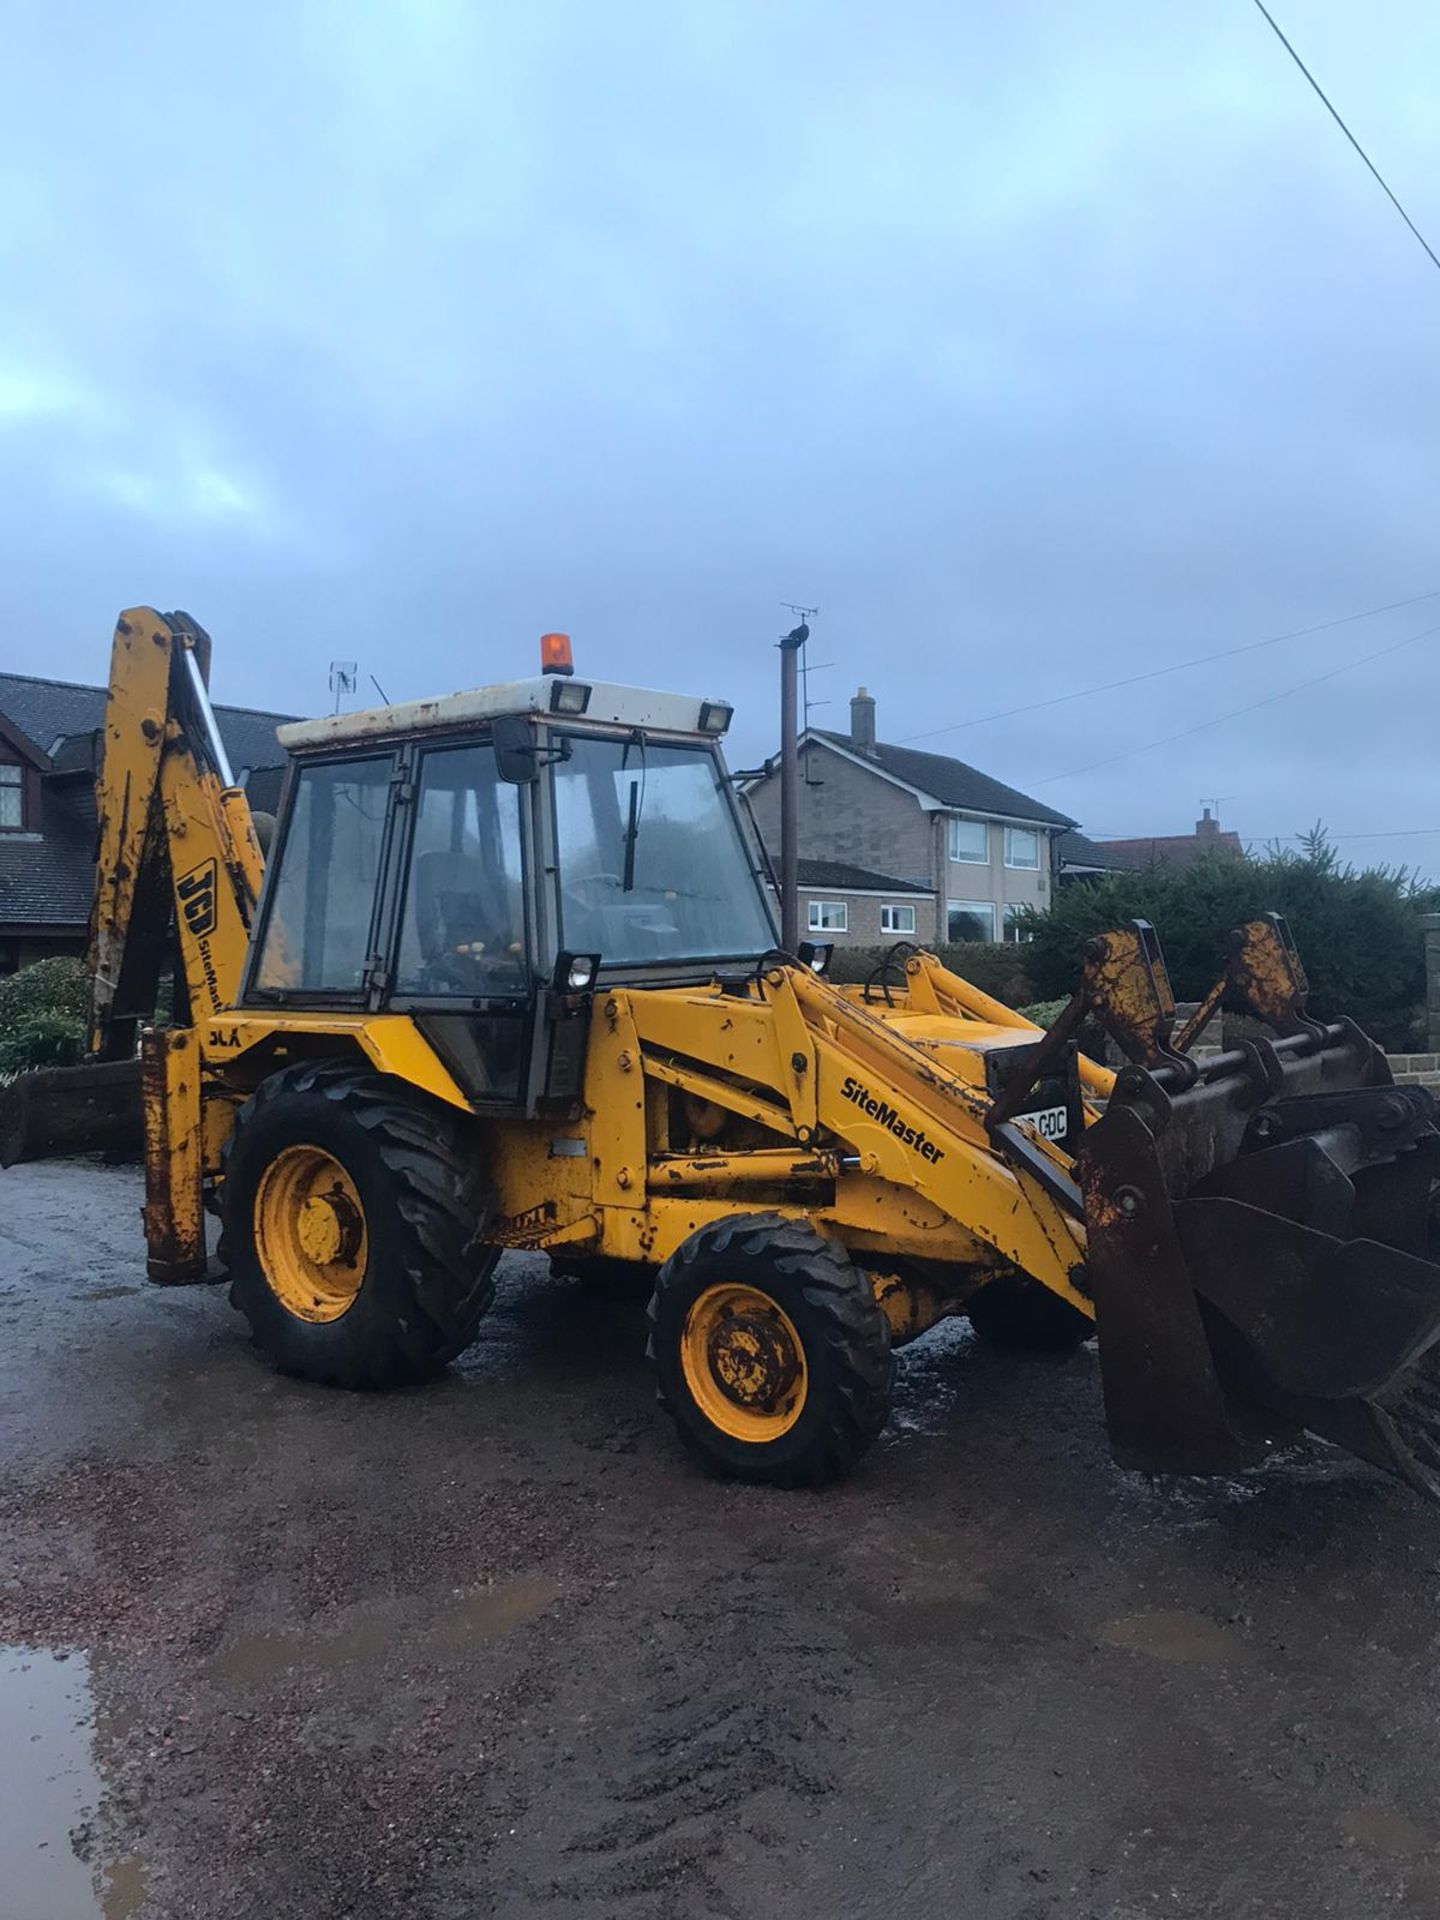 JCB 3CX SITEMASTER, 4 WHEEL DRIVE, EXTRA DIG, 4-IN-1 BUCKET, C/W 3 X BUCKETS, RUNS, WORKS & DIGS - Image 5 of 10